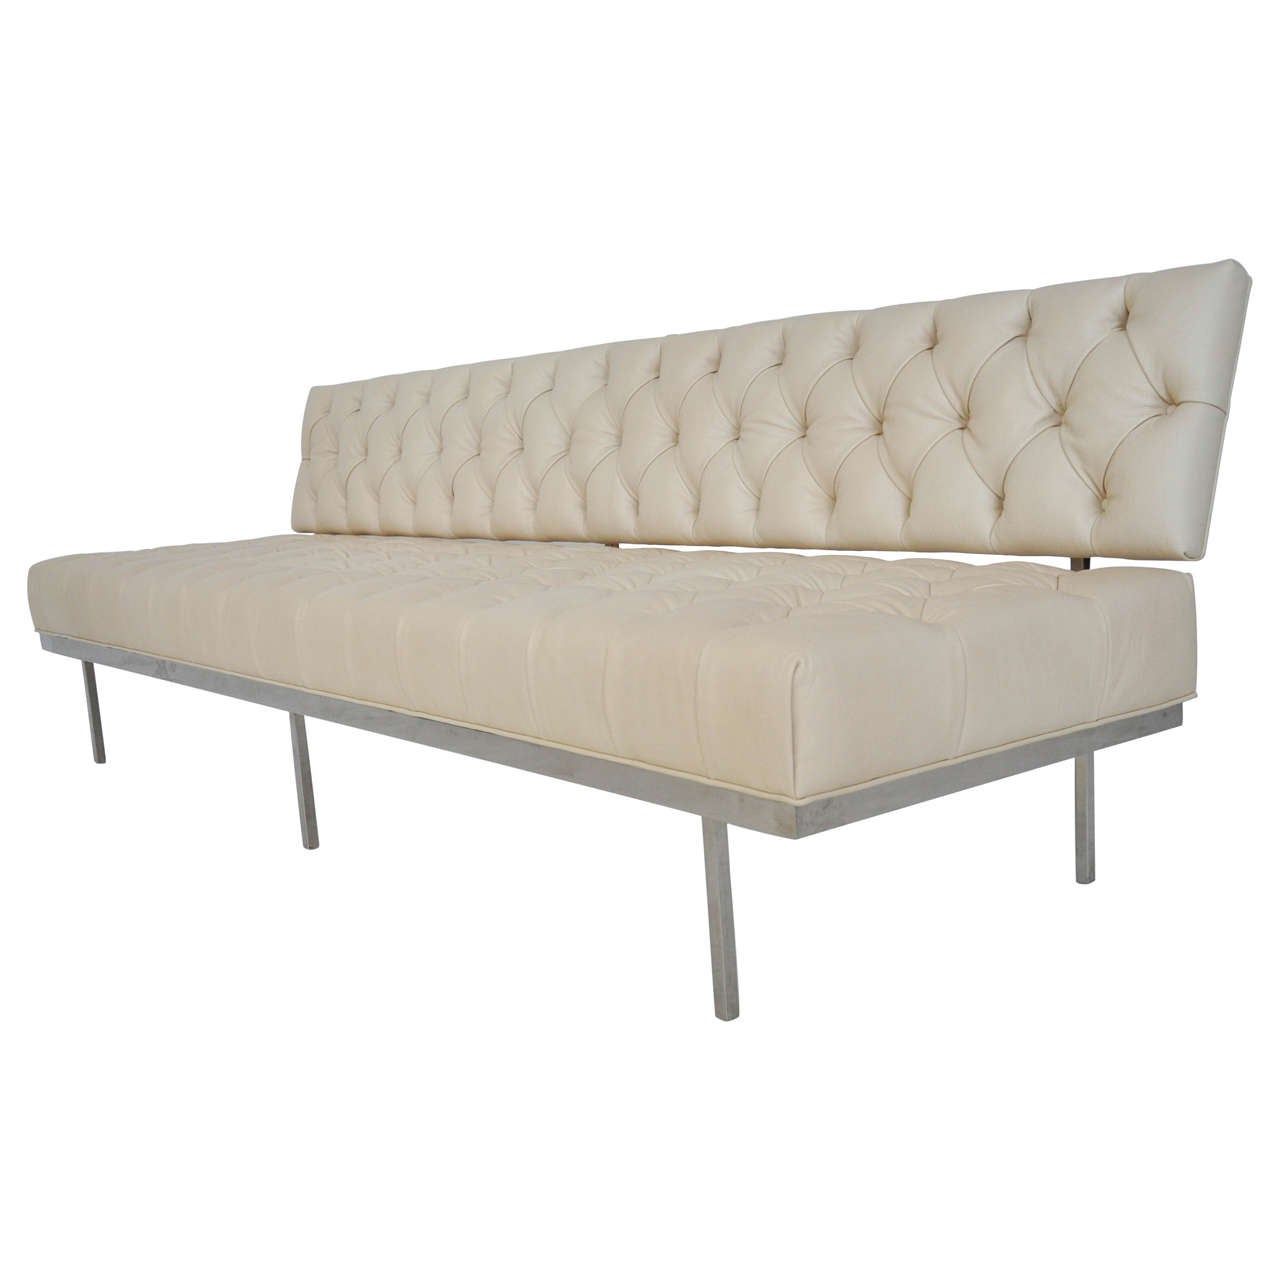 Florence Knoll Sofa, Stainless Steel With Tufted Leather Pertaining To Florence Knoll Leather Sofas (View 14 of 15)